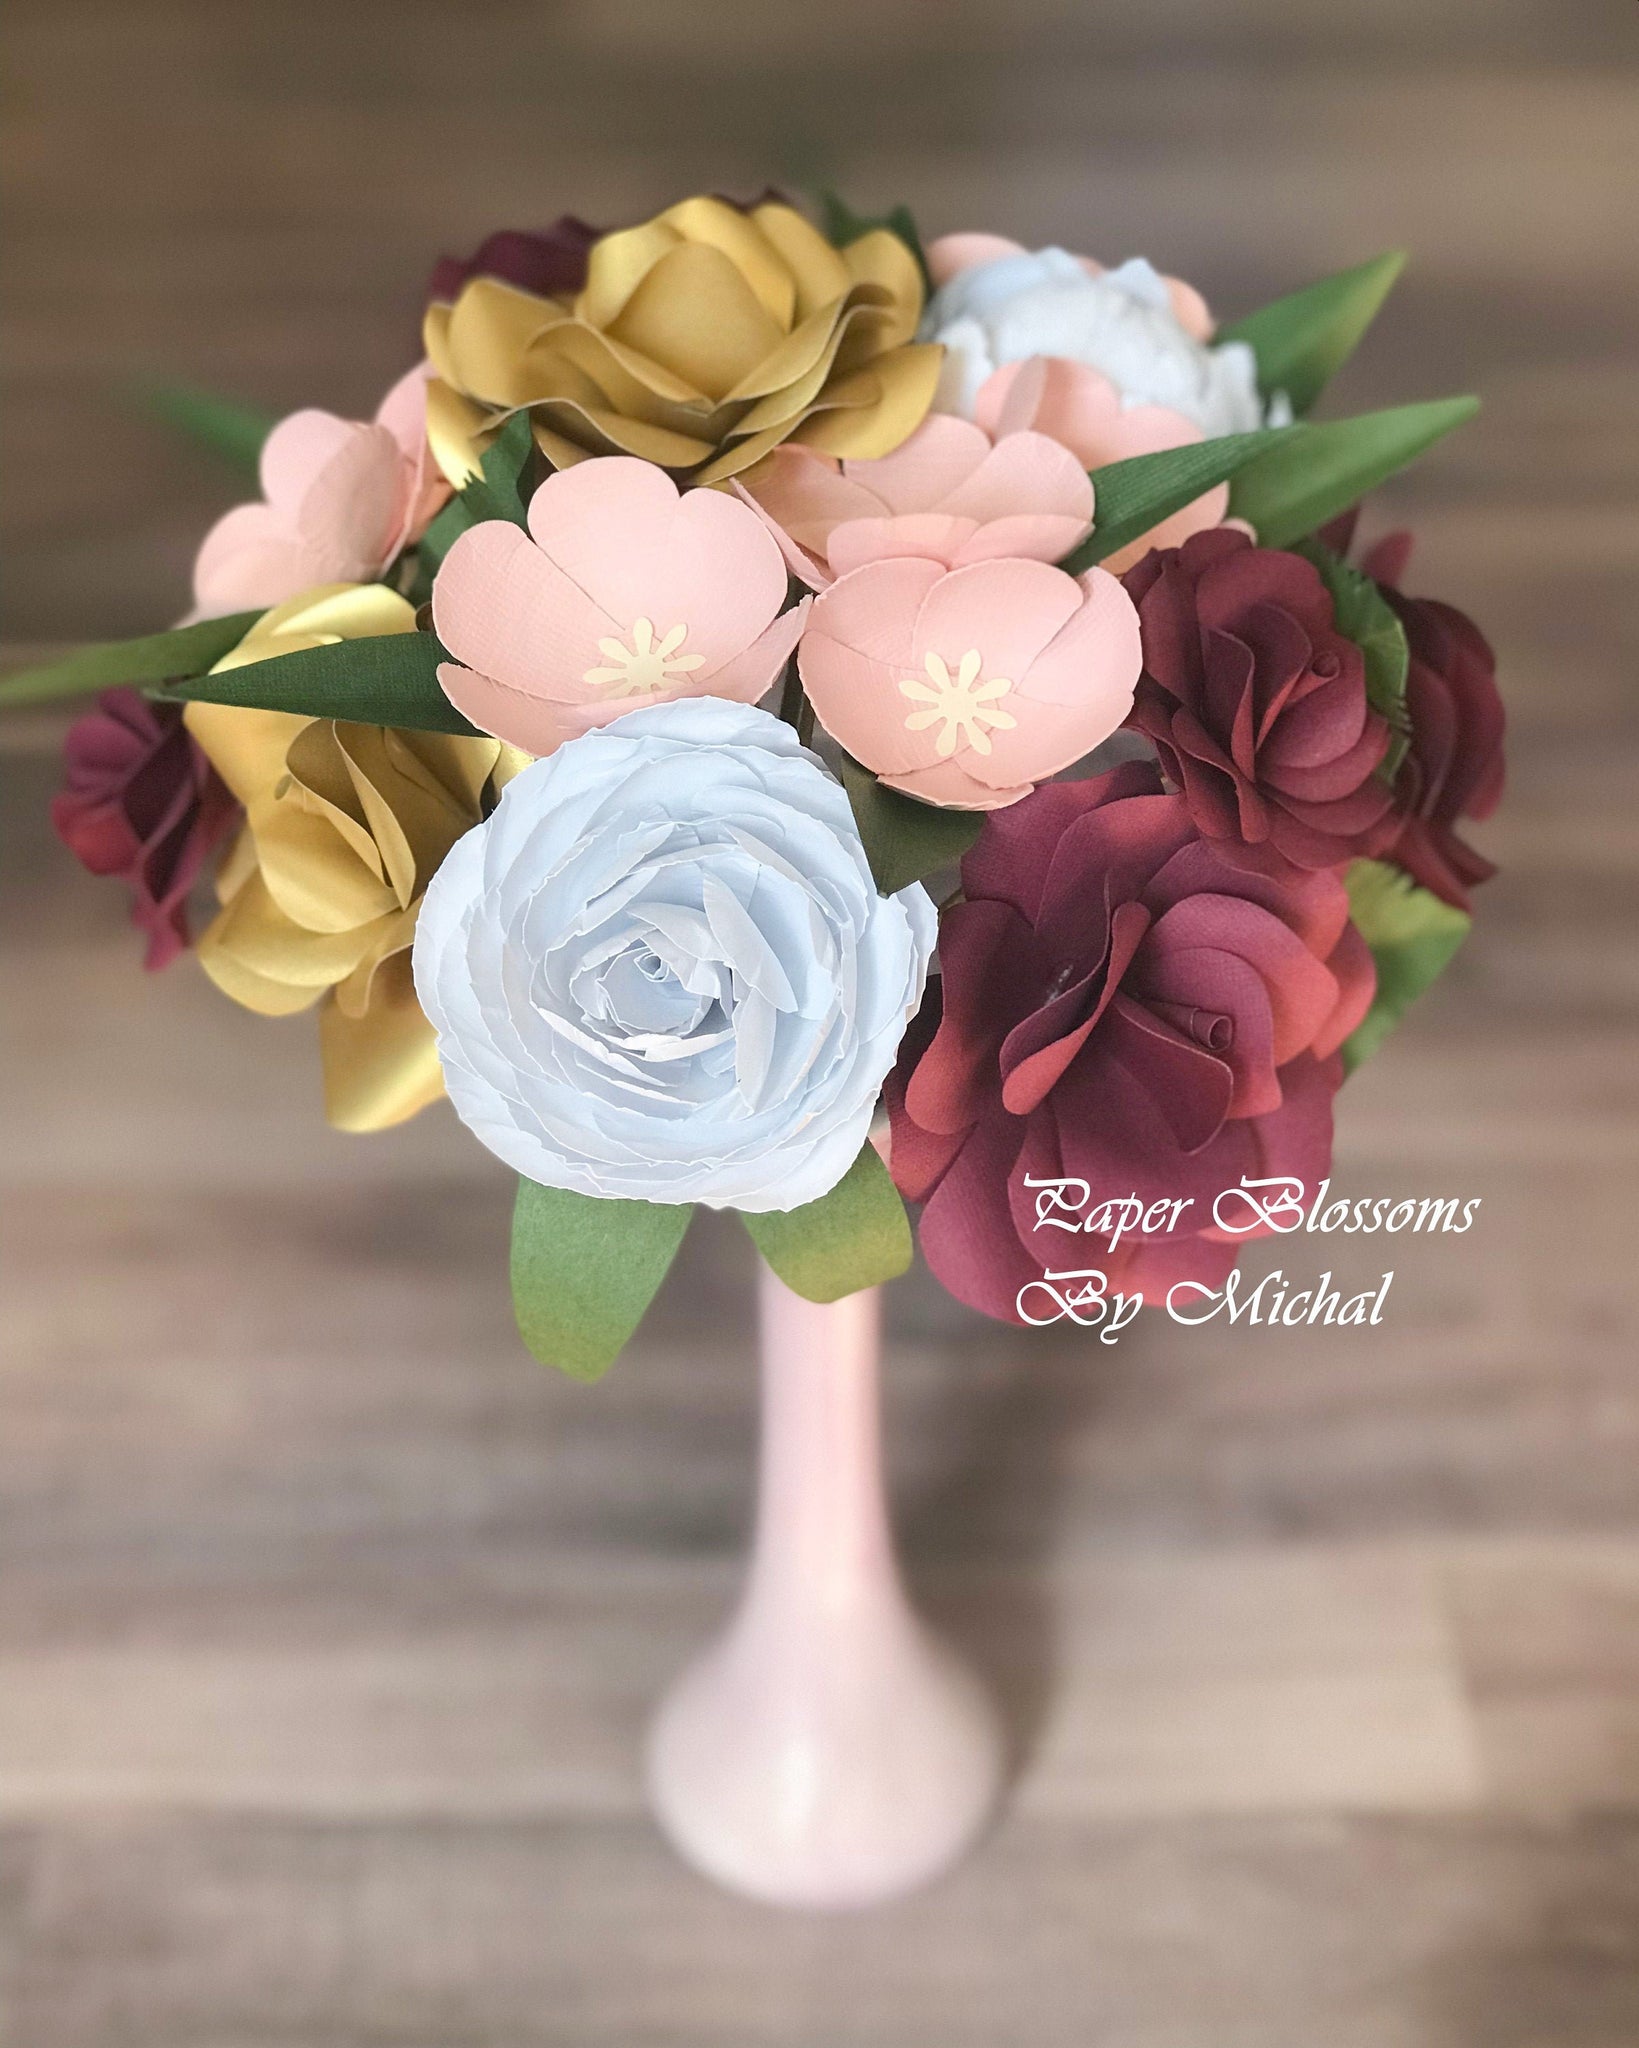 How to mix paper flowers and real flowers